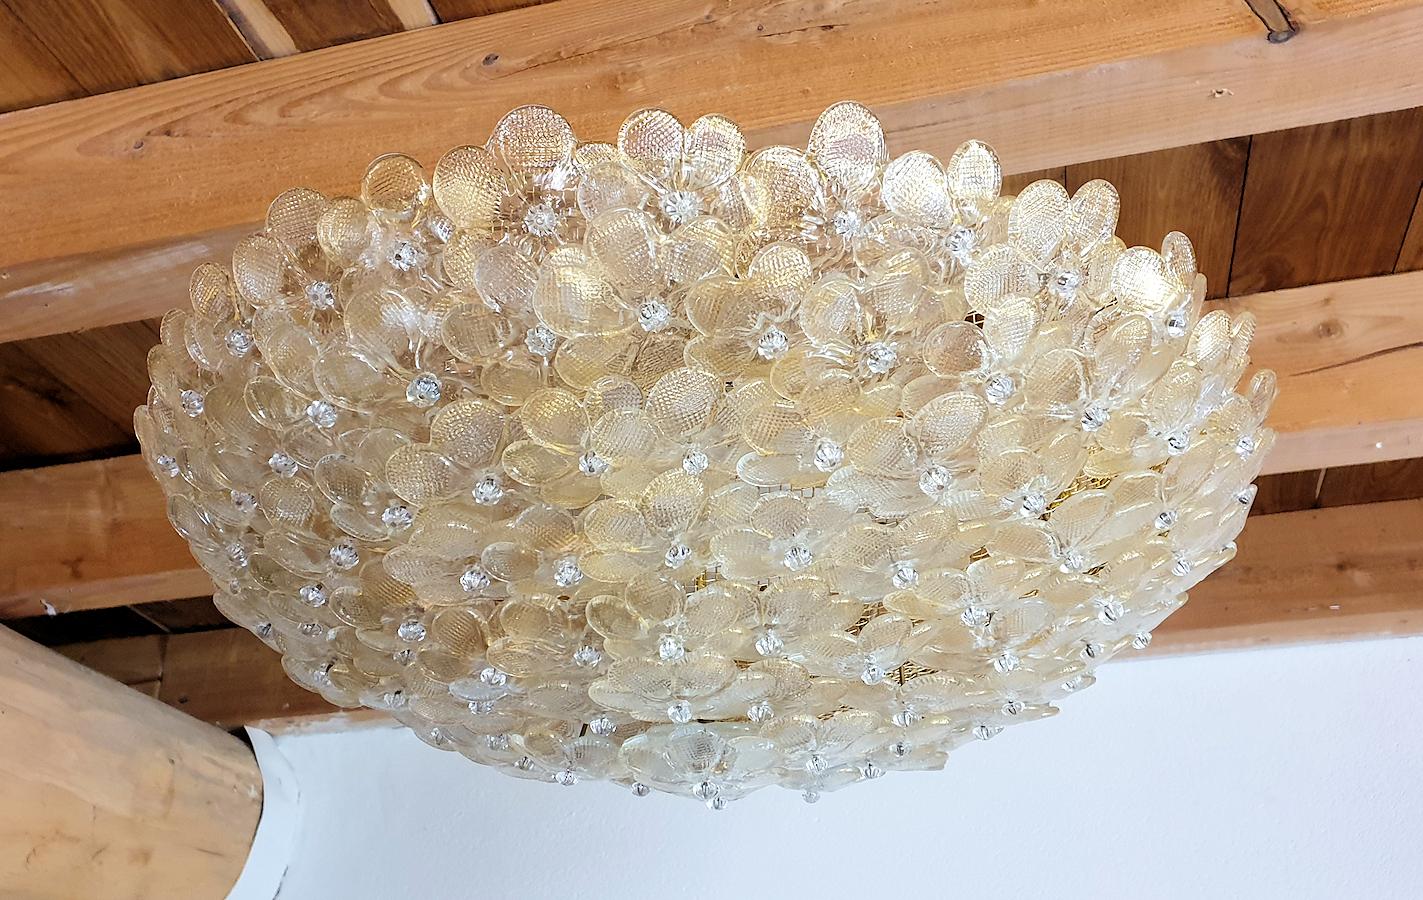 Large round Neoclassical Mid-Century Modern, Murano glass gold and clear handmade flowers chandelier, or flush-mount ceiling light,
by Barovier & Toso, Italy, late 1970s.
Two available.
Sold and priced individually.
The vintage Murano chandeliers